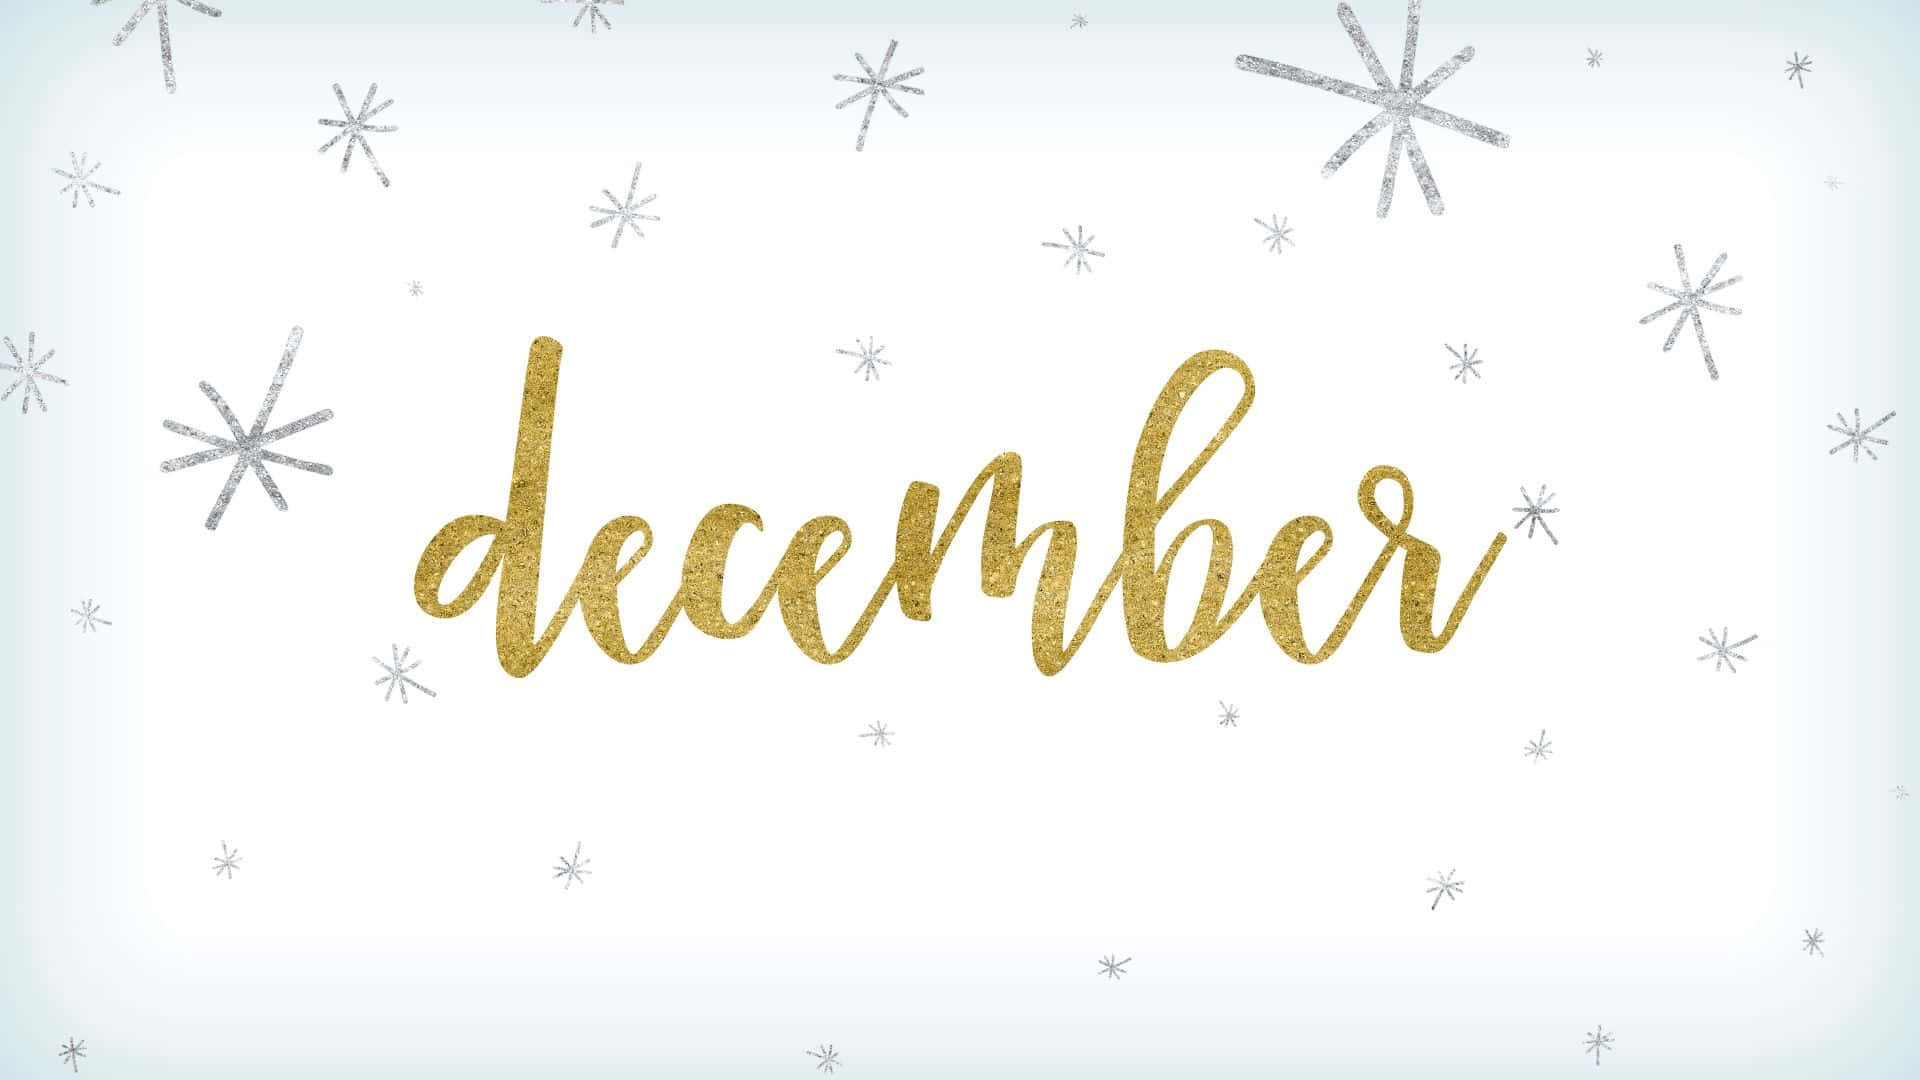 December Glitter Text Snowflakes Background Wallpaper